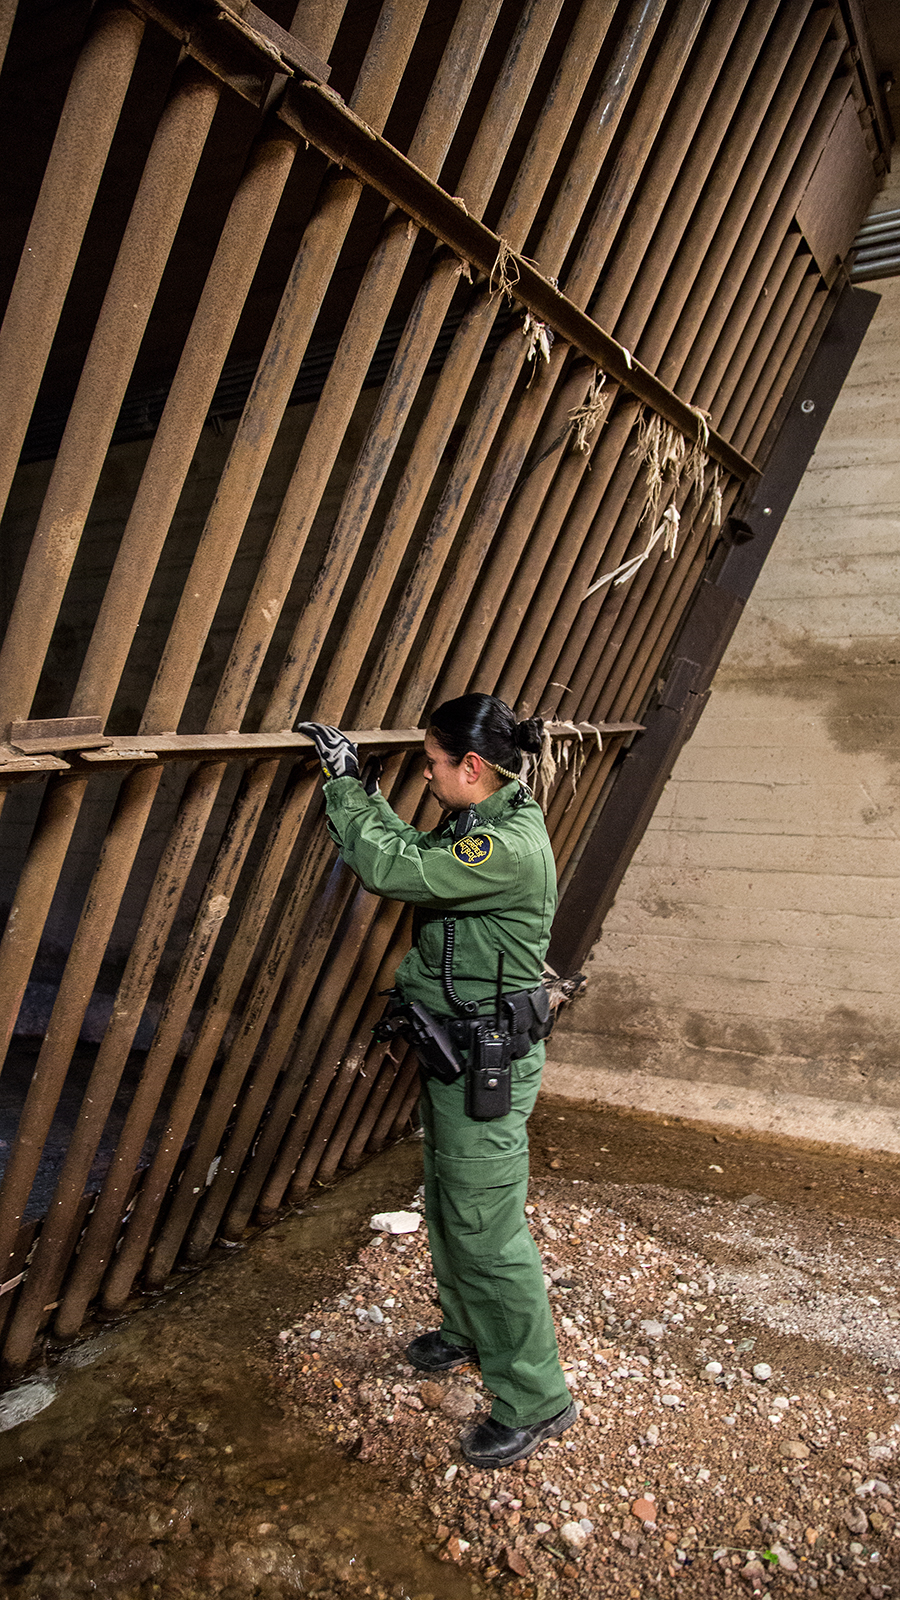 A Border Patrol agent looks through the steel gates in Nogales' main drainage system, which were built to prevent drug and human trafficking.